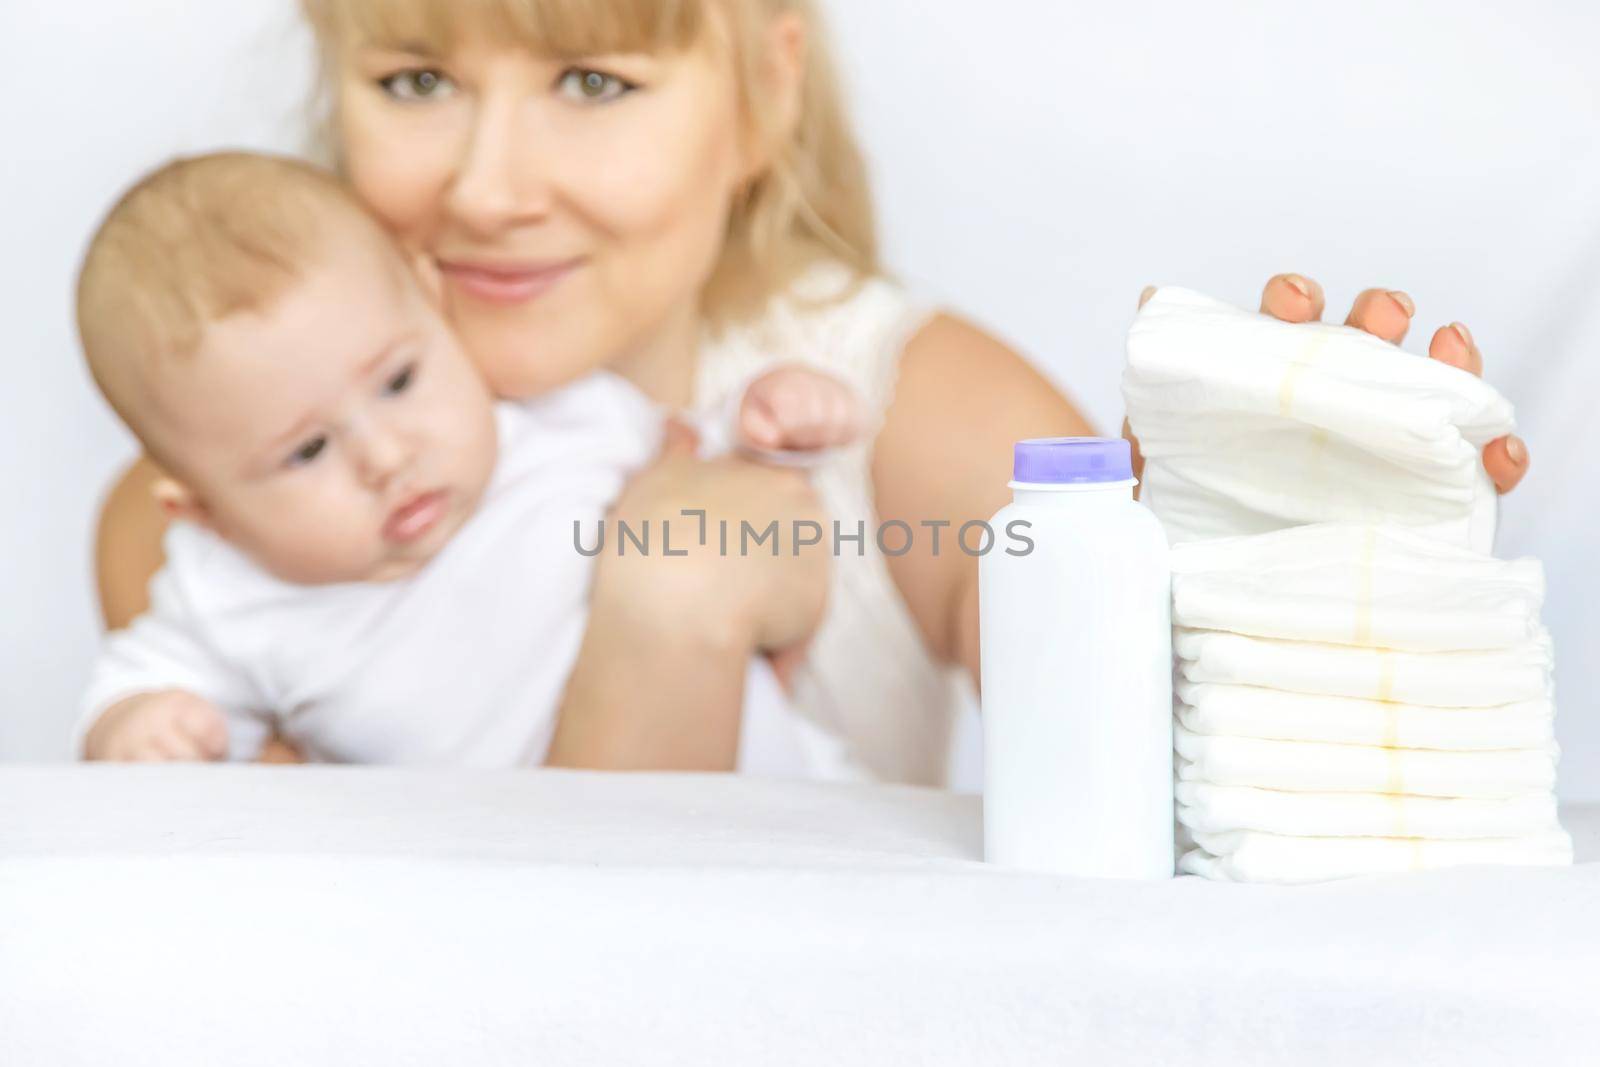 mother changes baby's diaper on a light background. Selective focus. people.